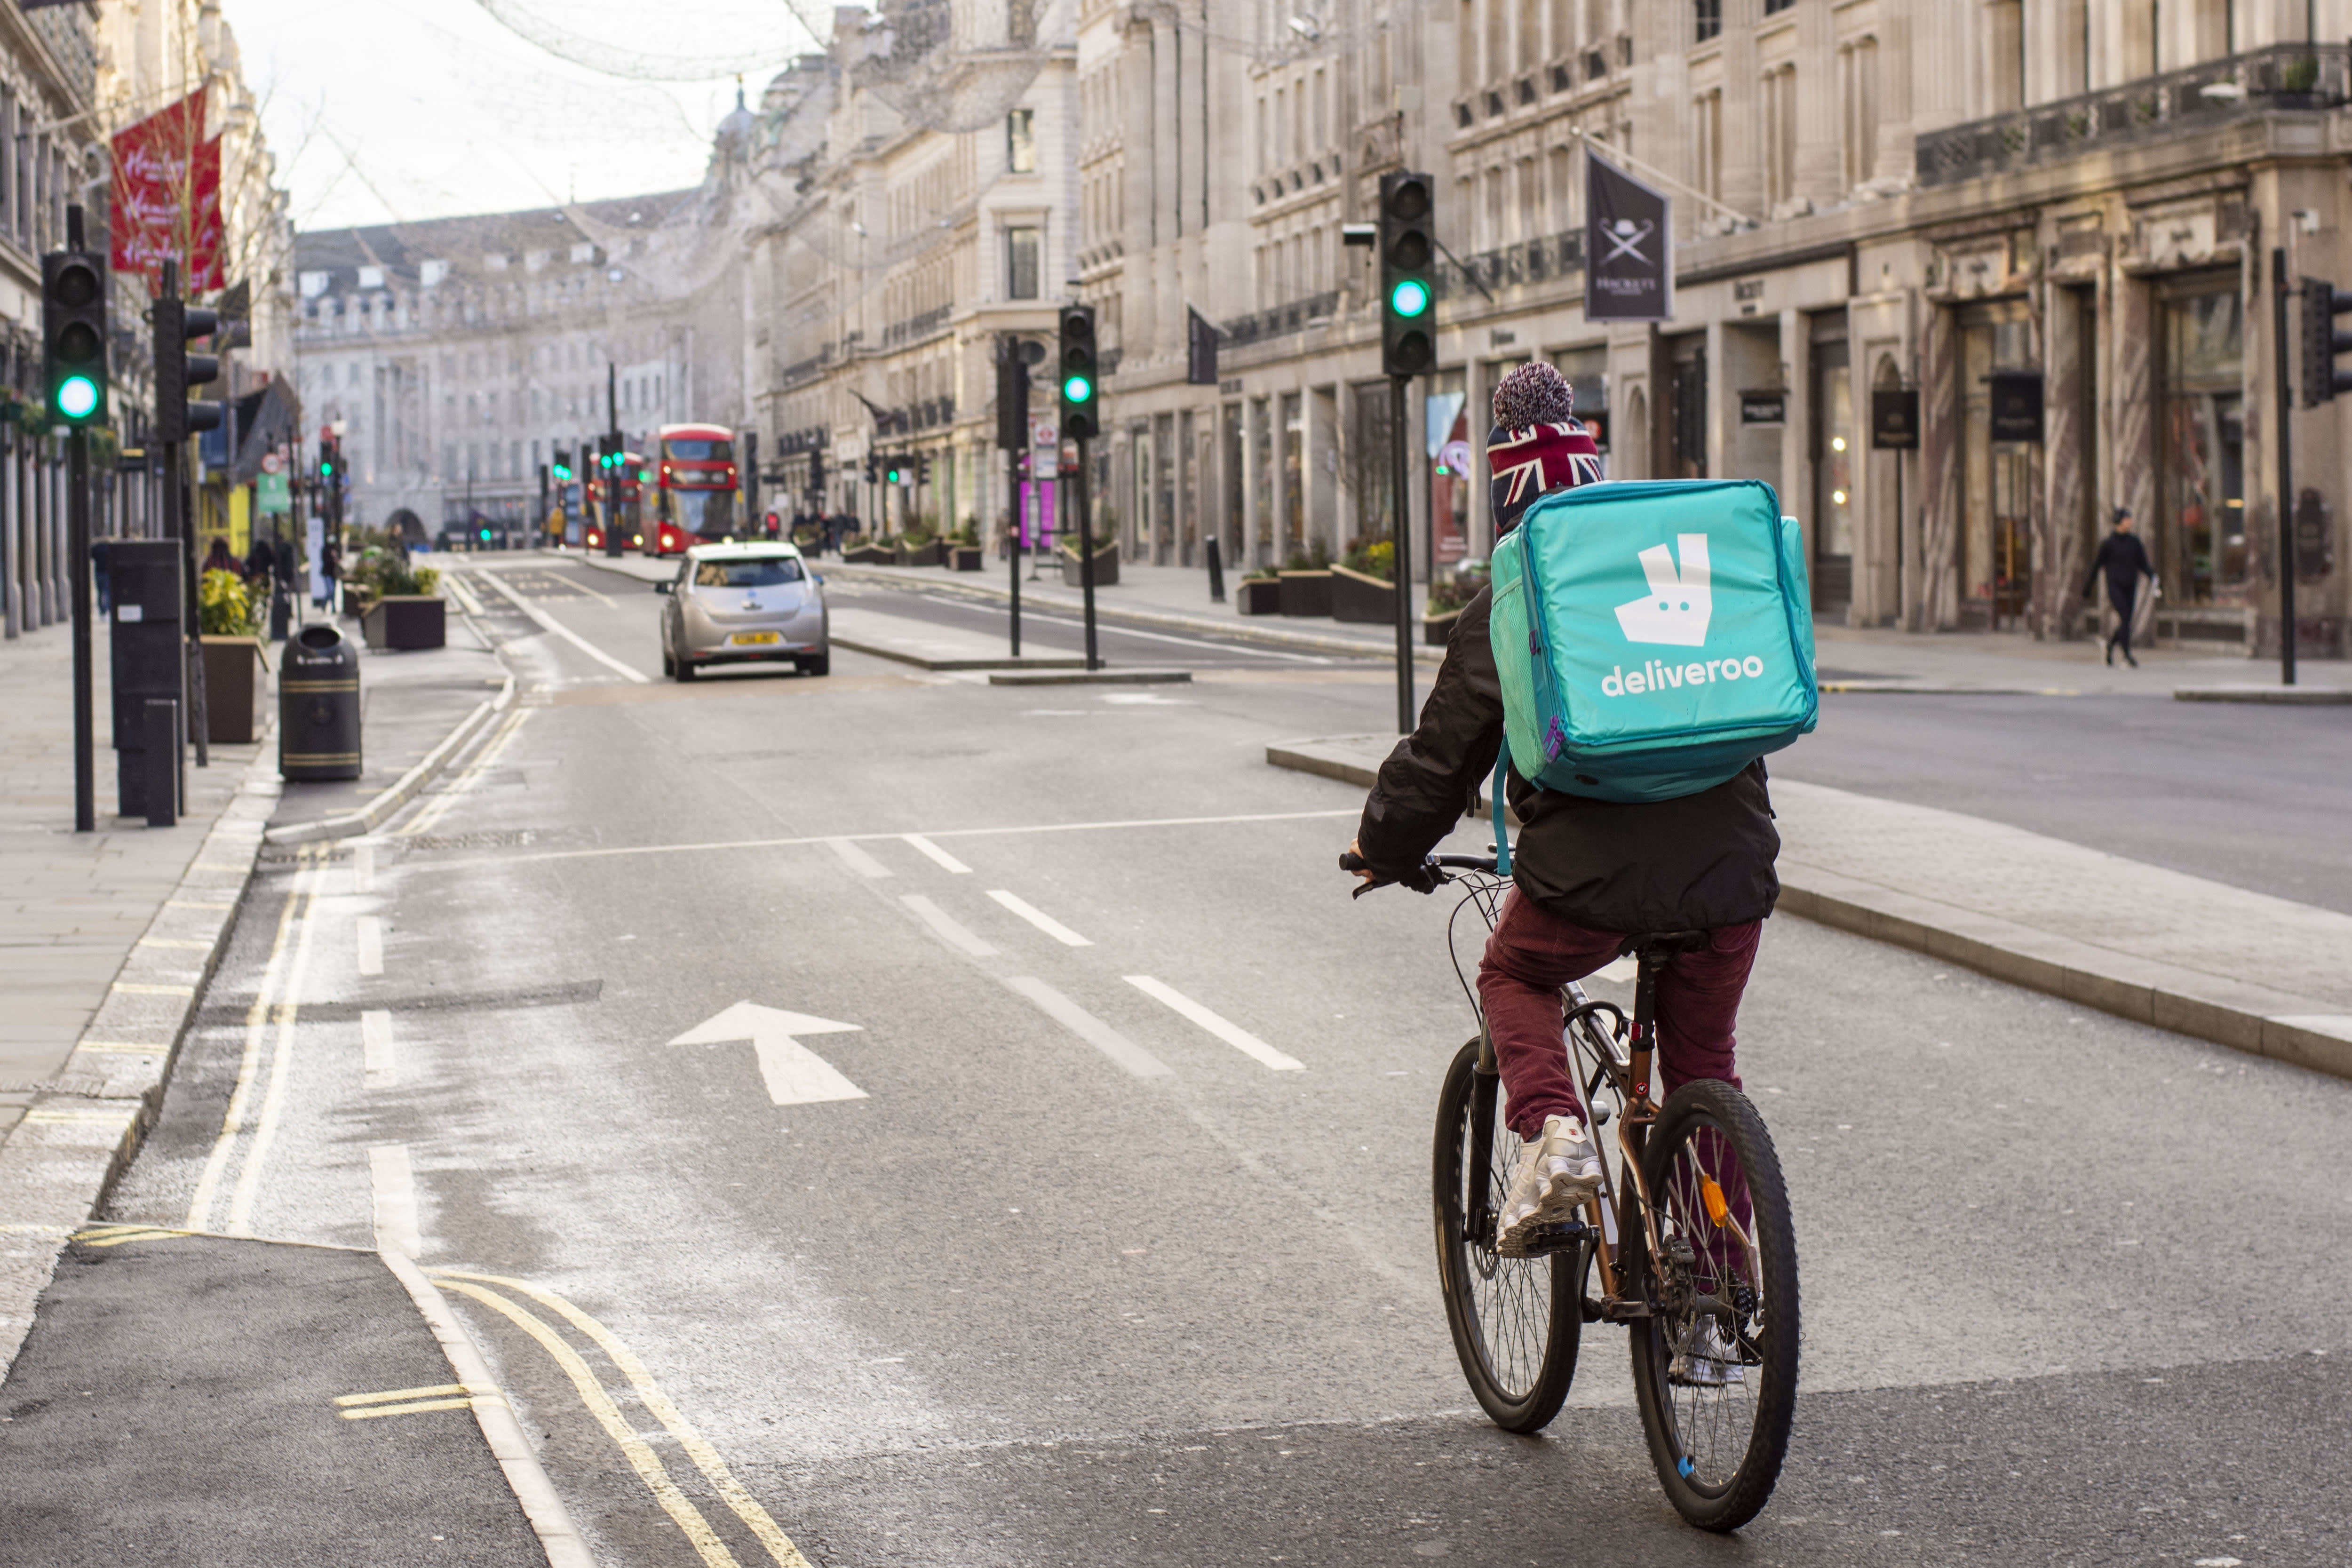 Amazon-backed Deliveroo aims to raise $ 1.4 billion in upcoming stock exchange